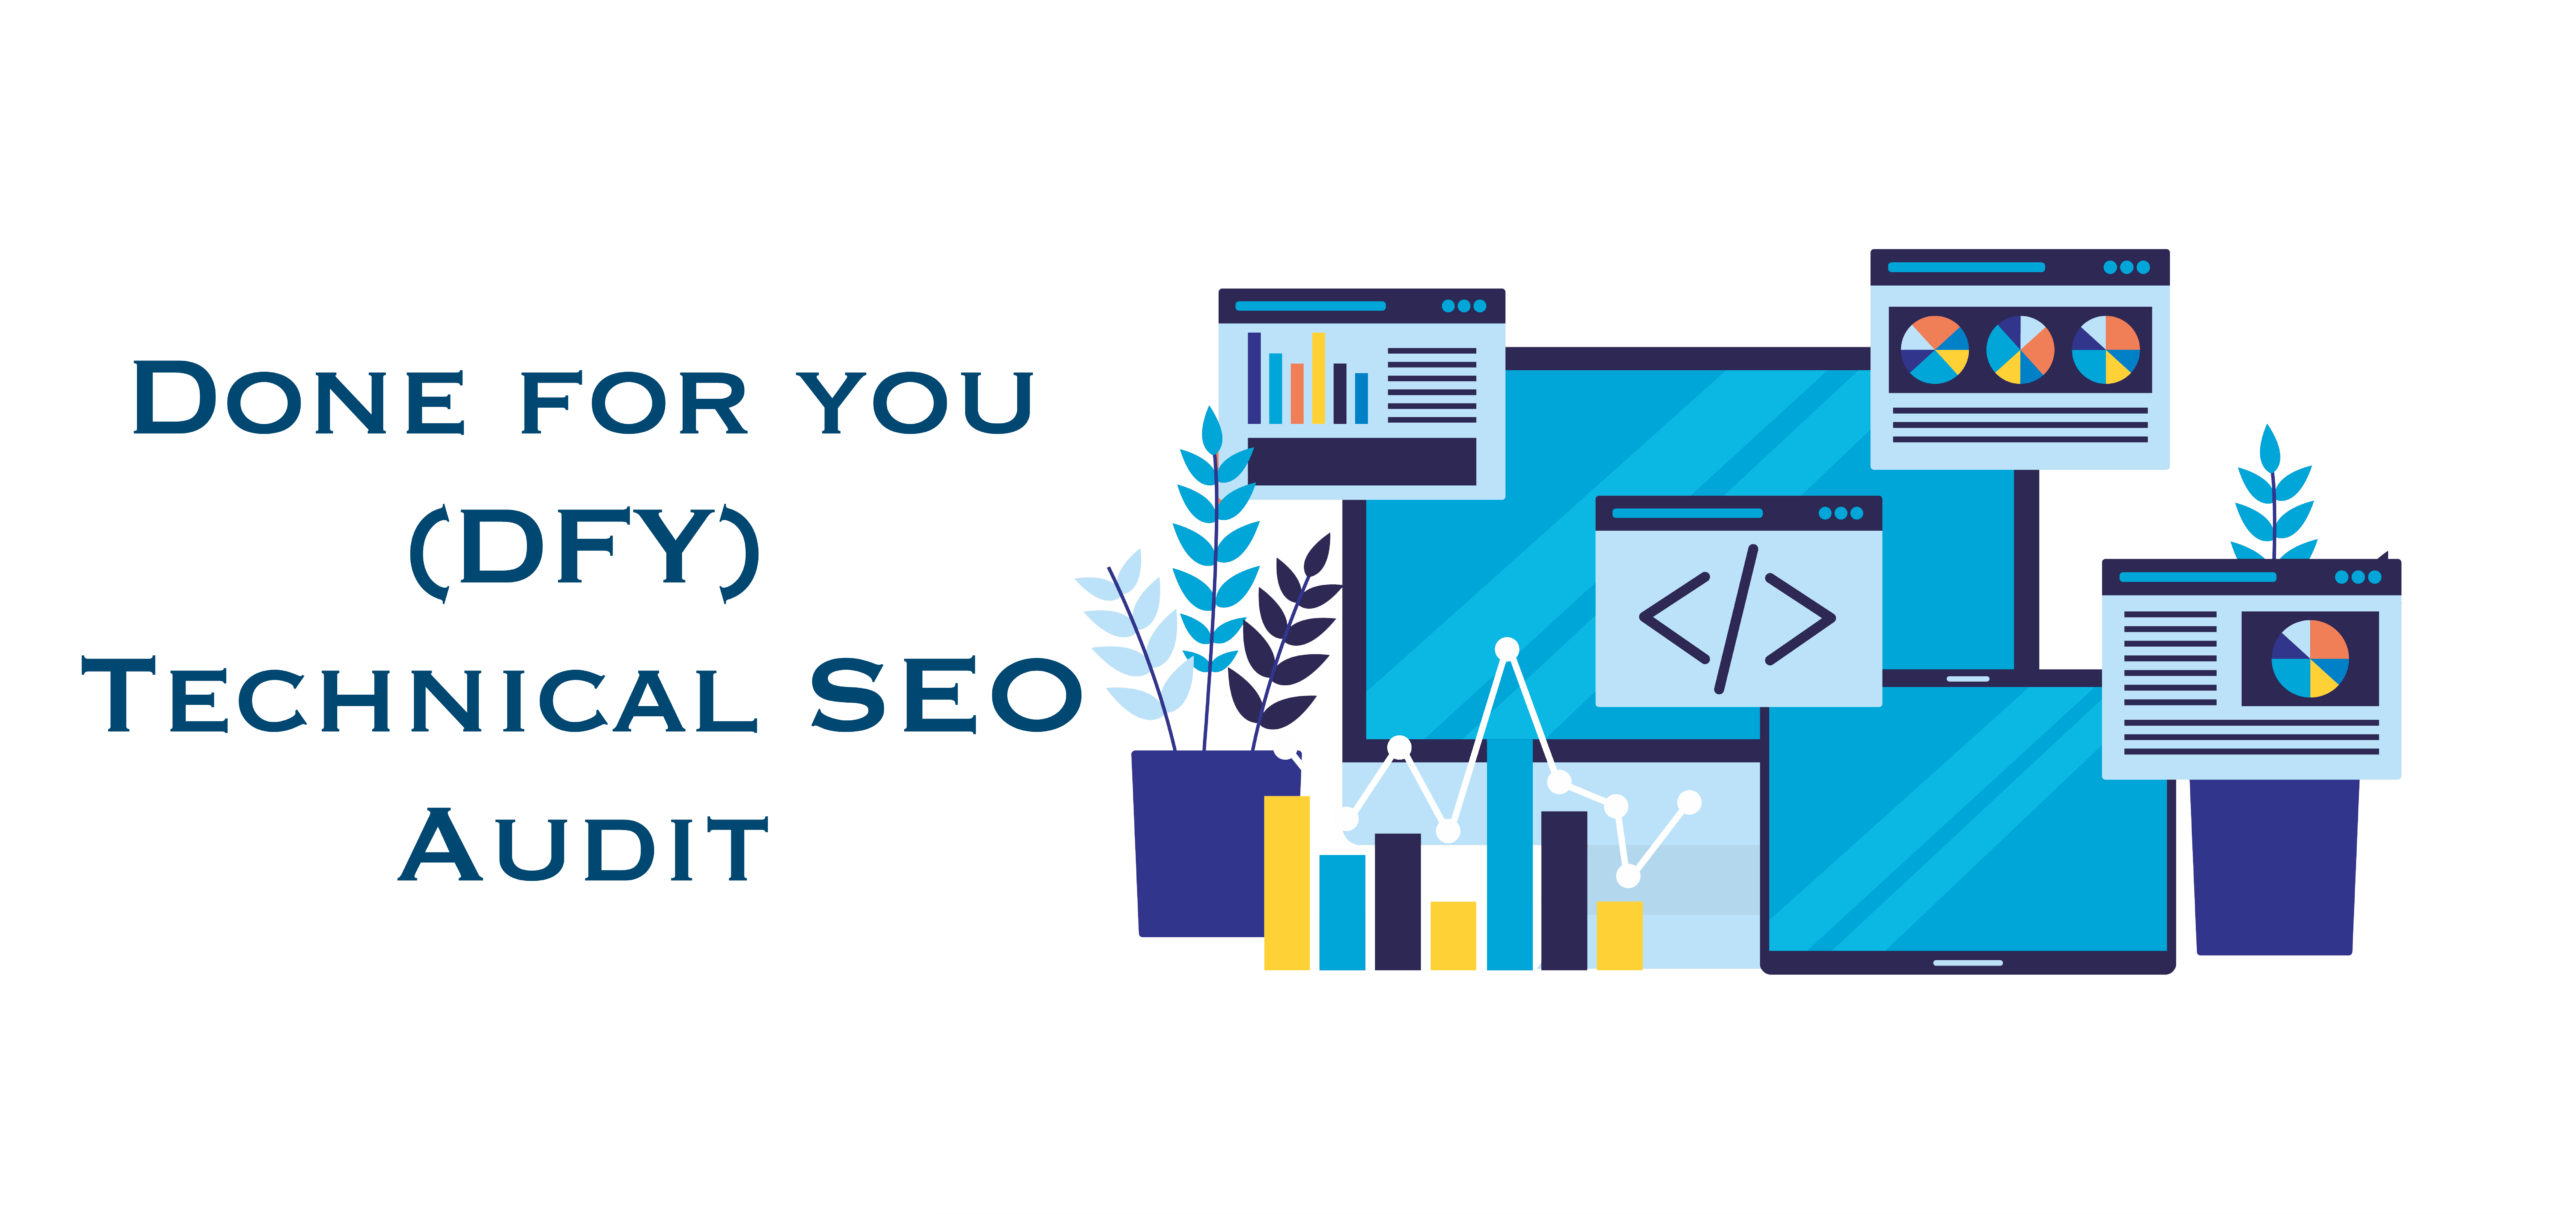 The 30 Point Technical SEO Audit